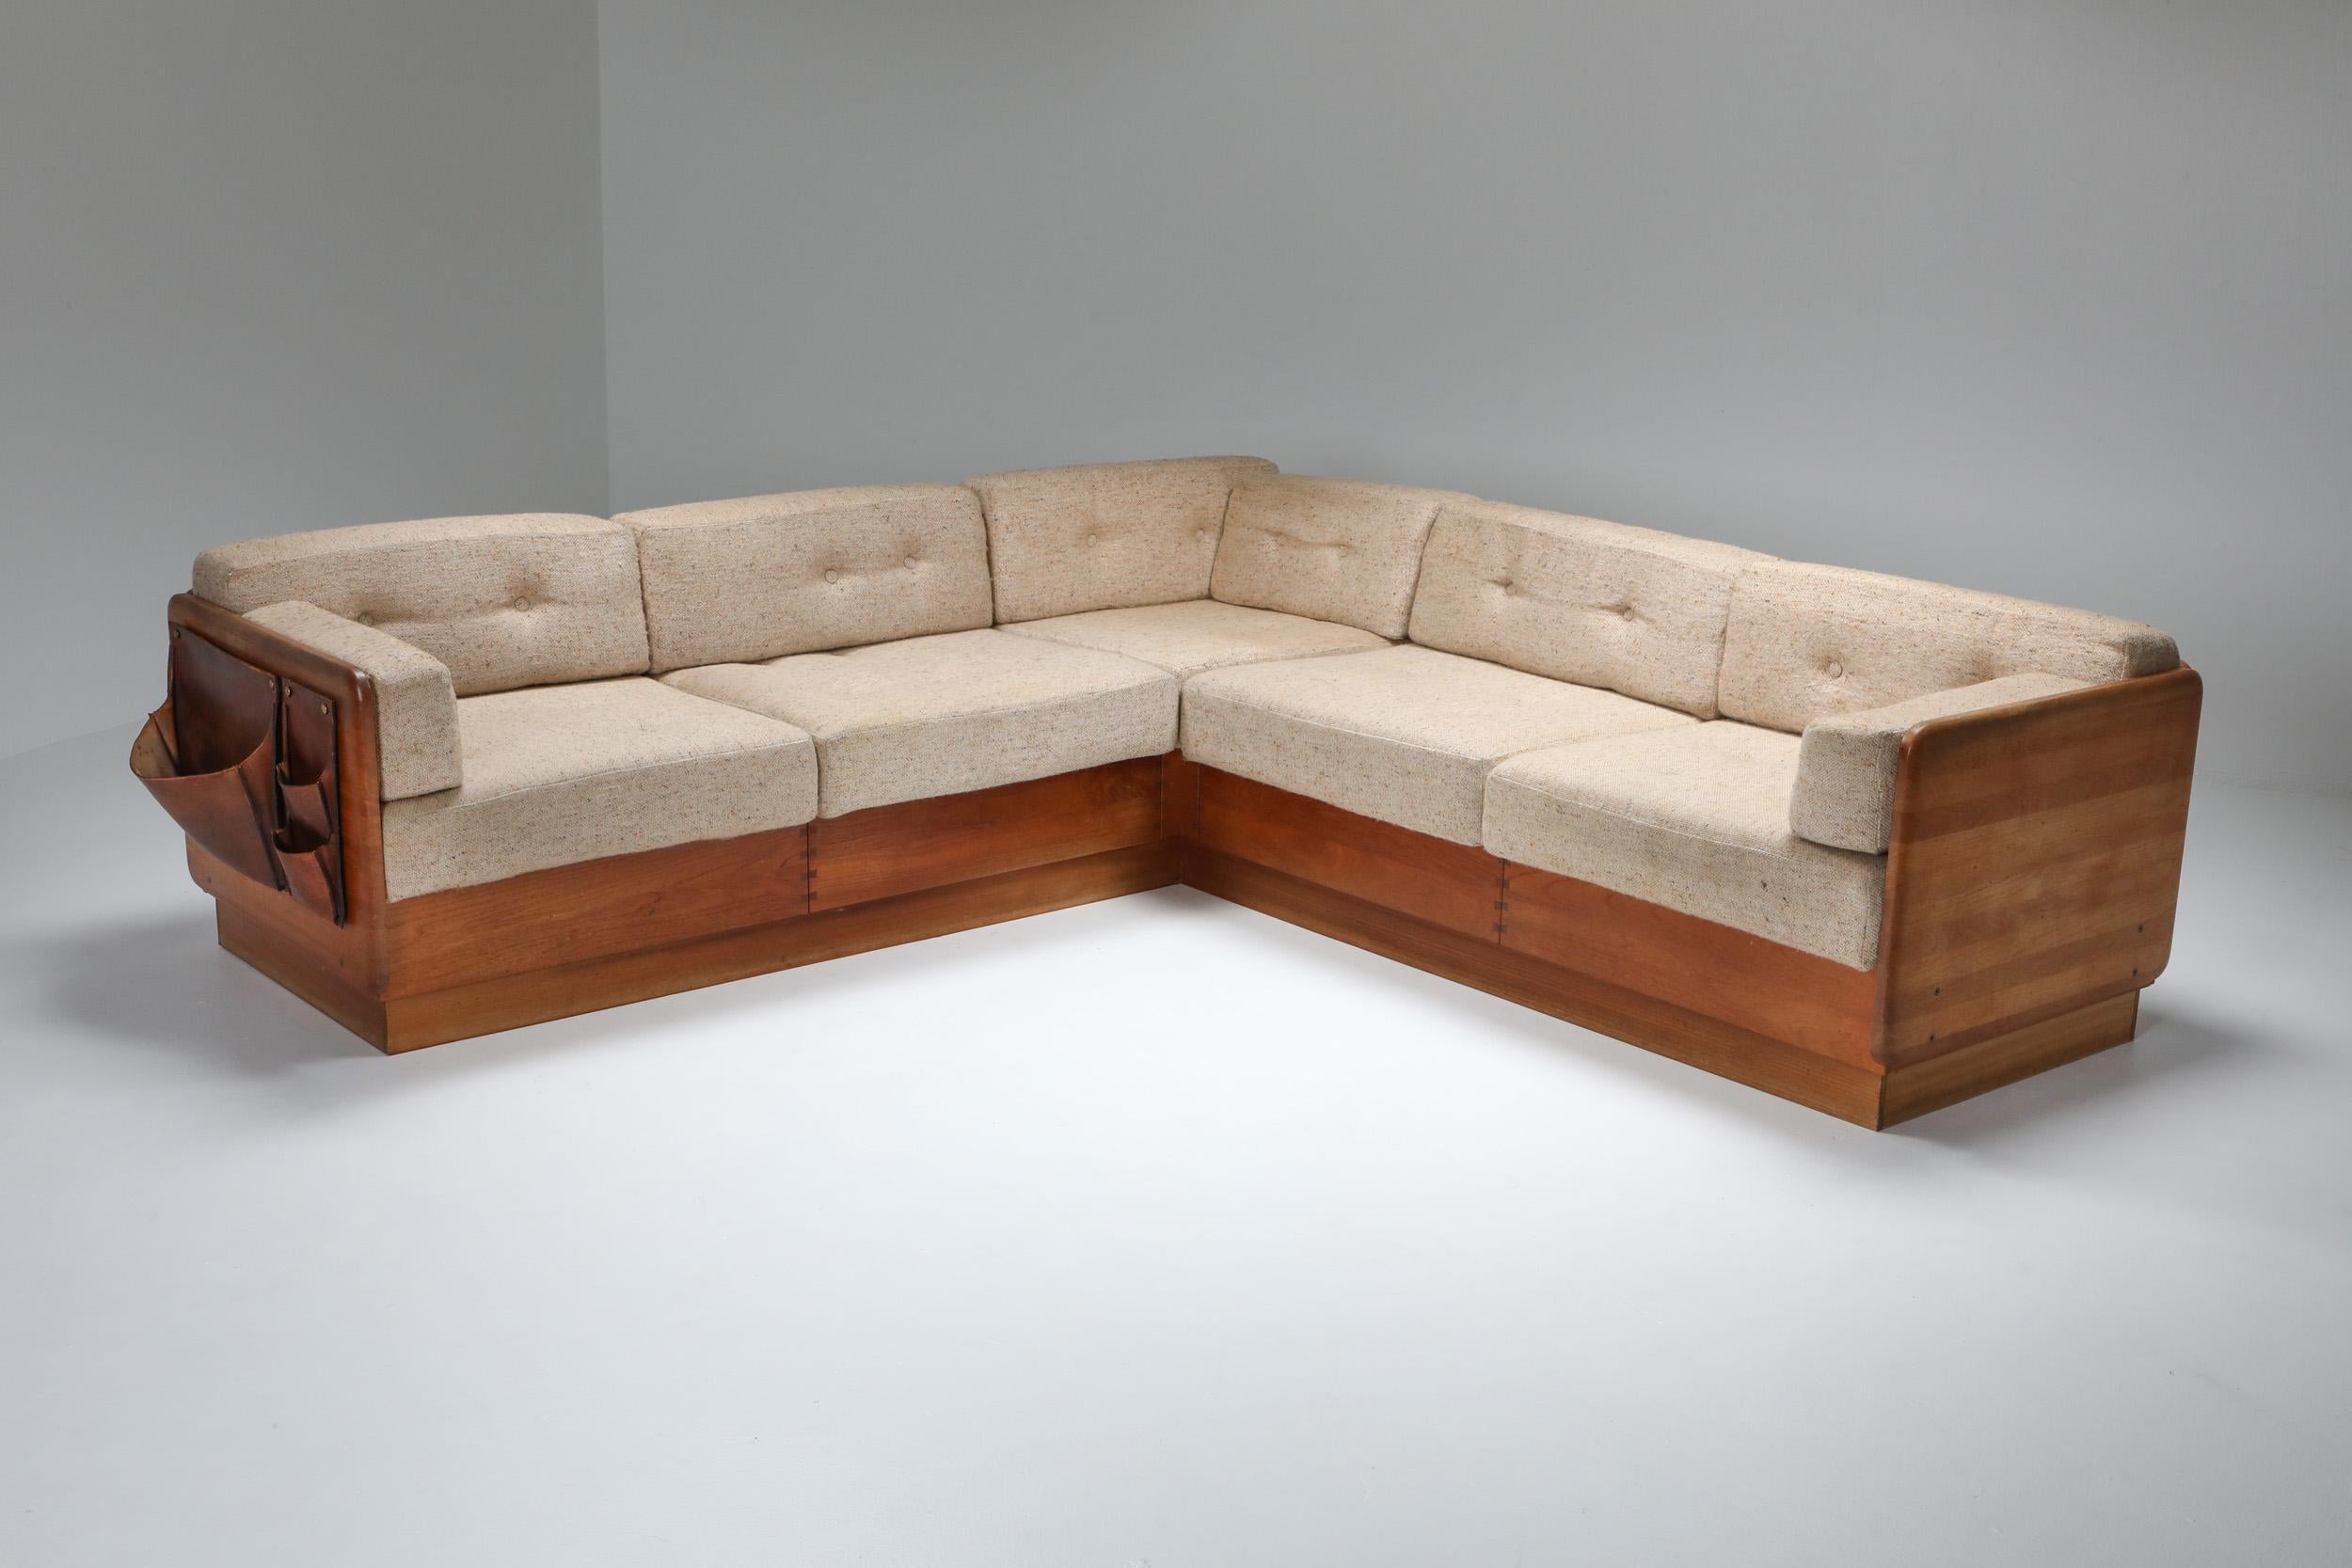 Scandinavian Modern, sectional and modular corner sofa, Mikael Laursen, Denmark, 1960s.

Solid teak wood, butterfly connections, leather newspaper holder
Cream wool upholstery.
In case you prefer another color or type of fabric, even leather